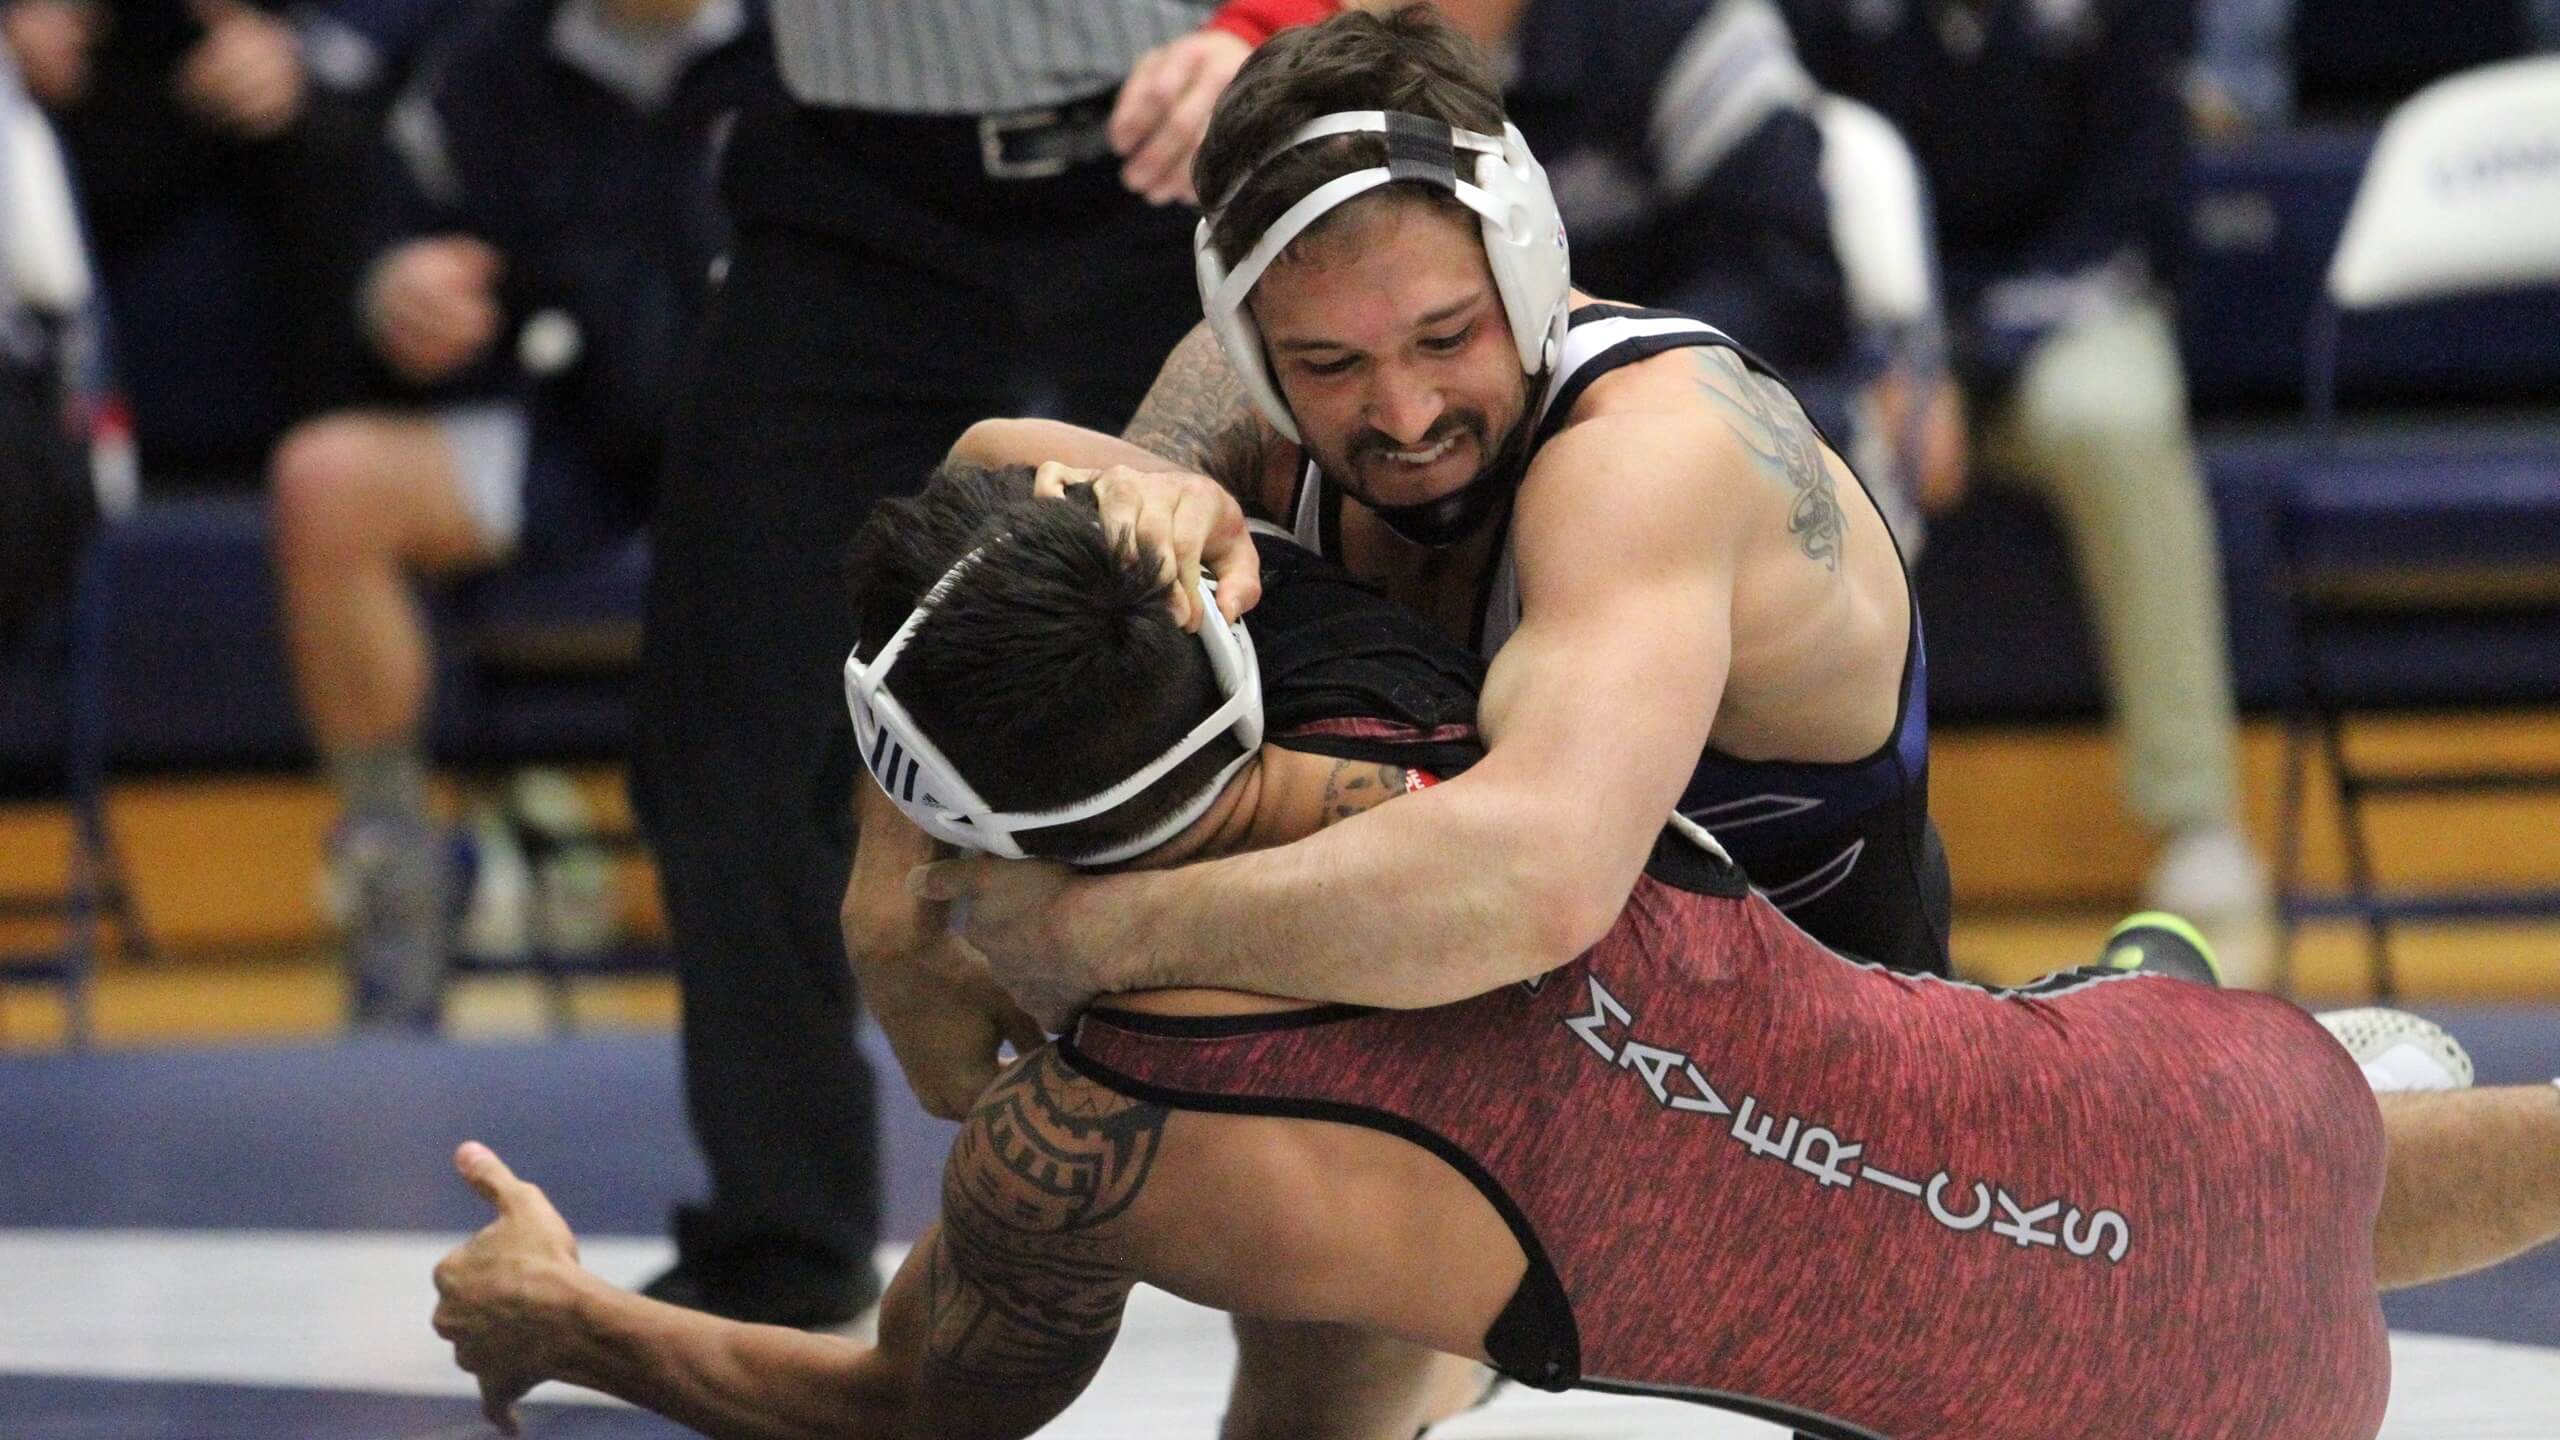 Bulldogs rack up 57 wins, 10 place finishes at Doane Open Wrestling